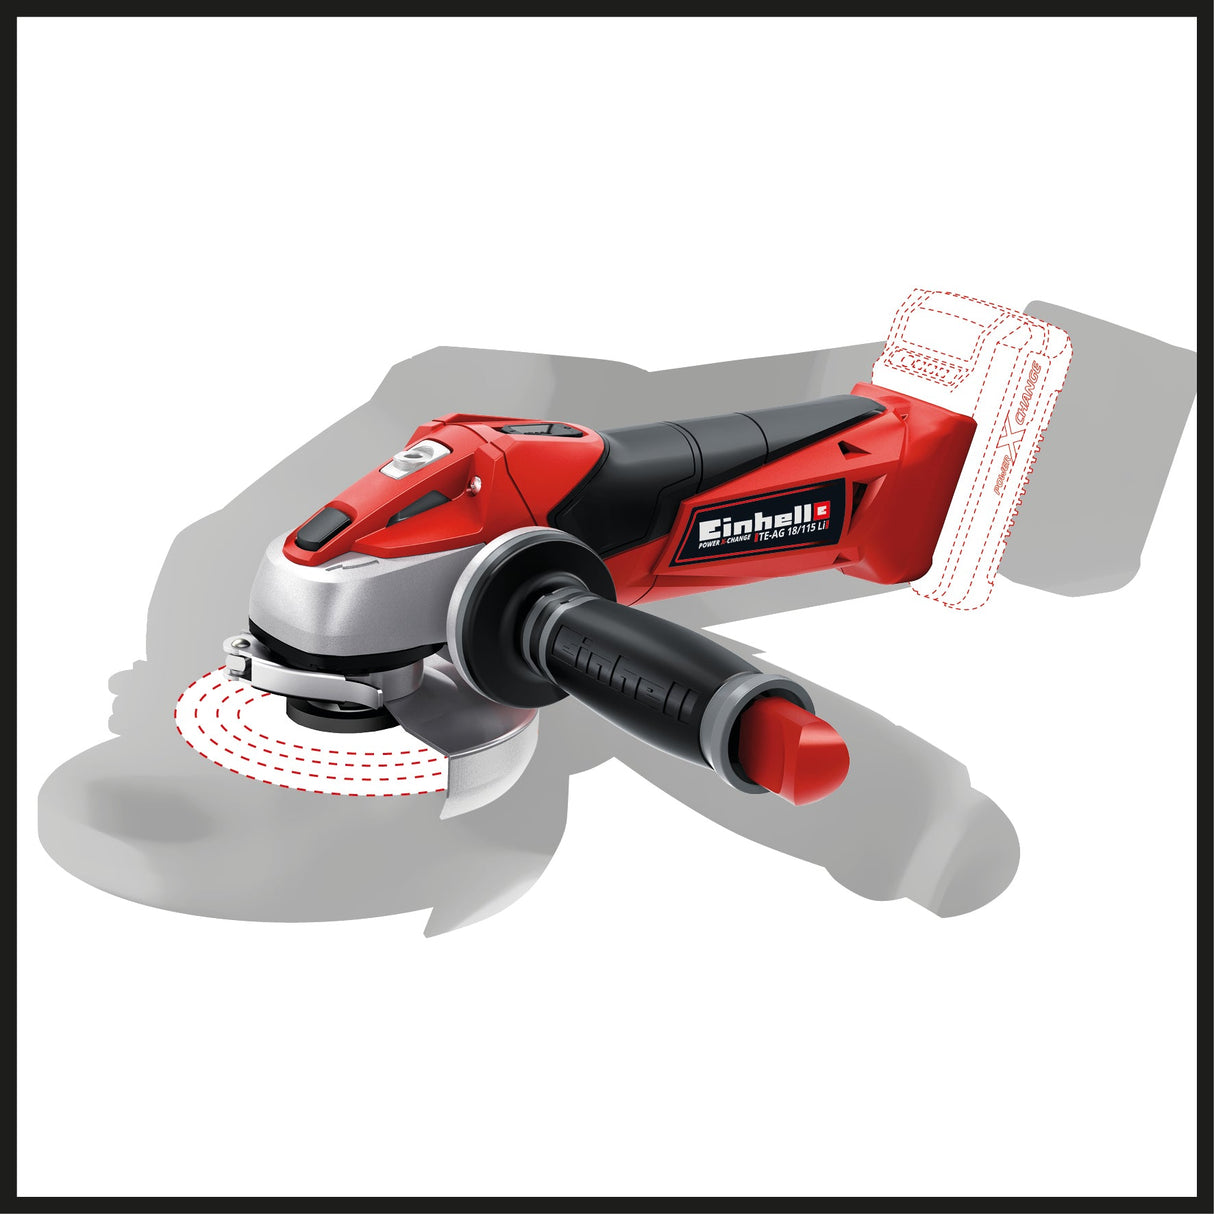 Einhell Power Tools 18V 4-1/2” Cordless Angle Grinder